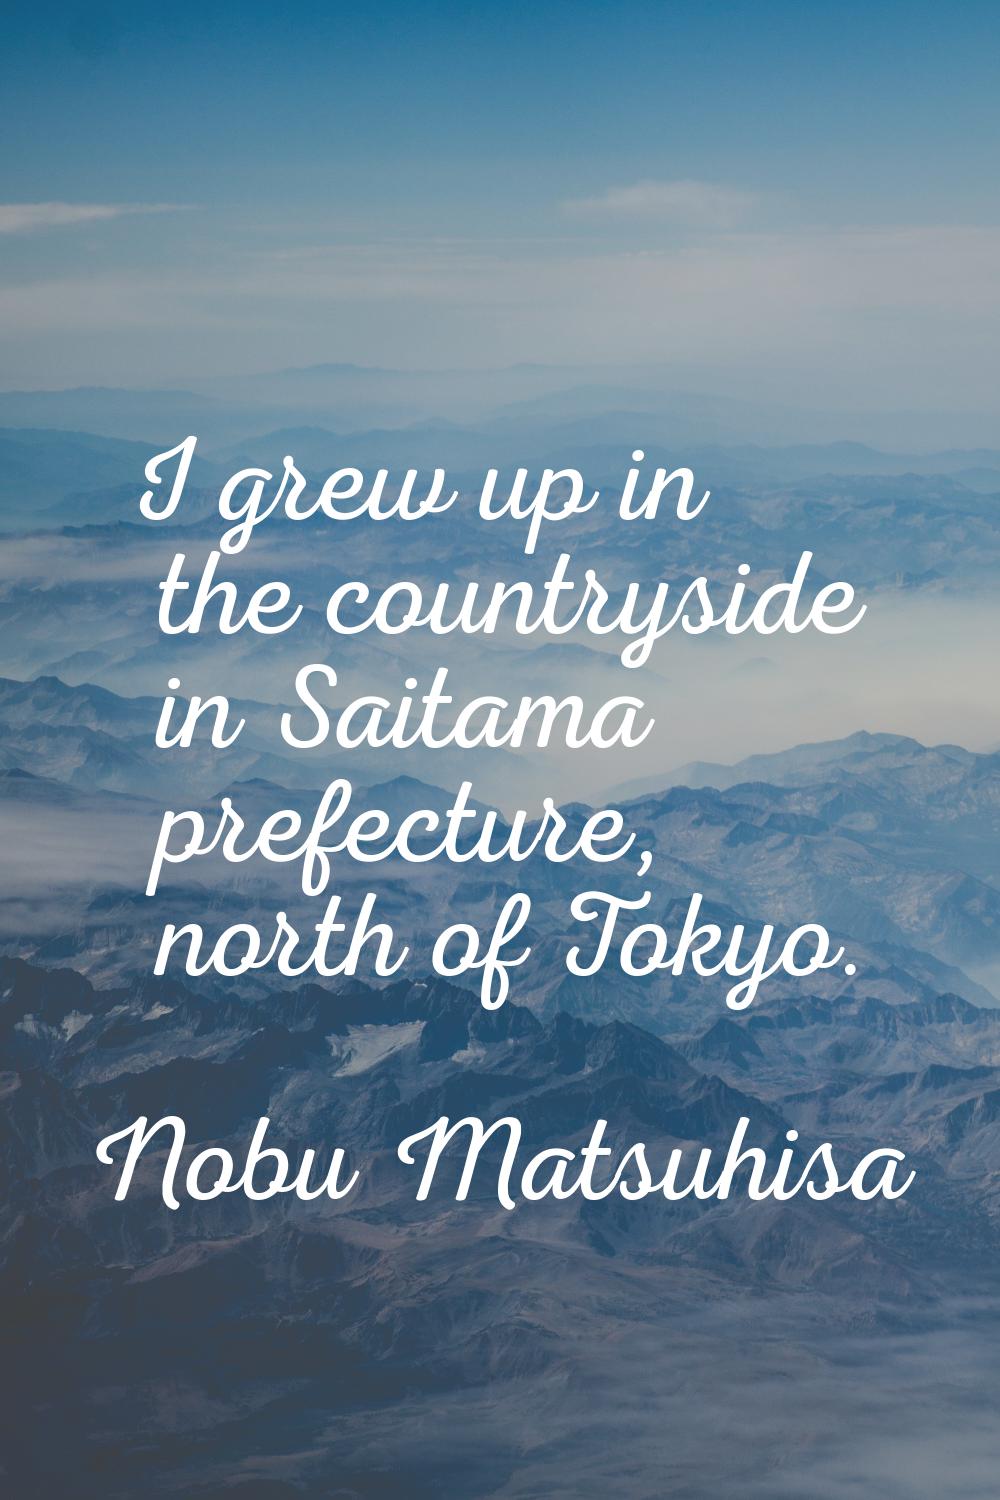 I grew up in the countryside in Saitama prefecture, north of Tokyo.